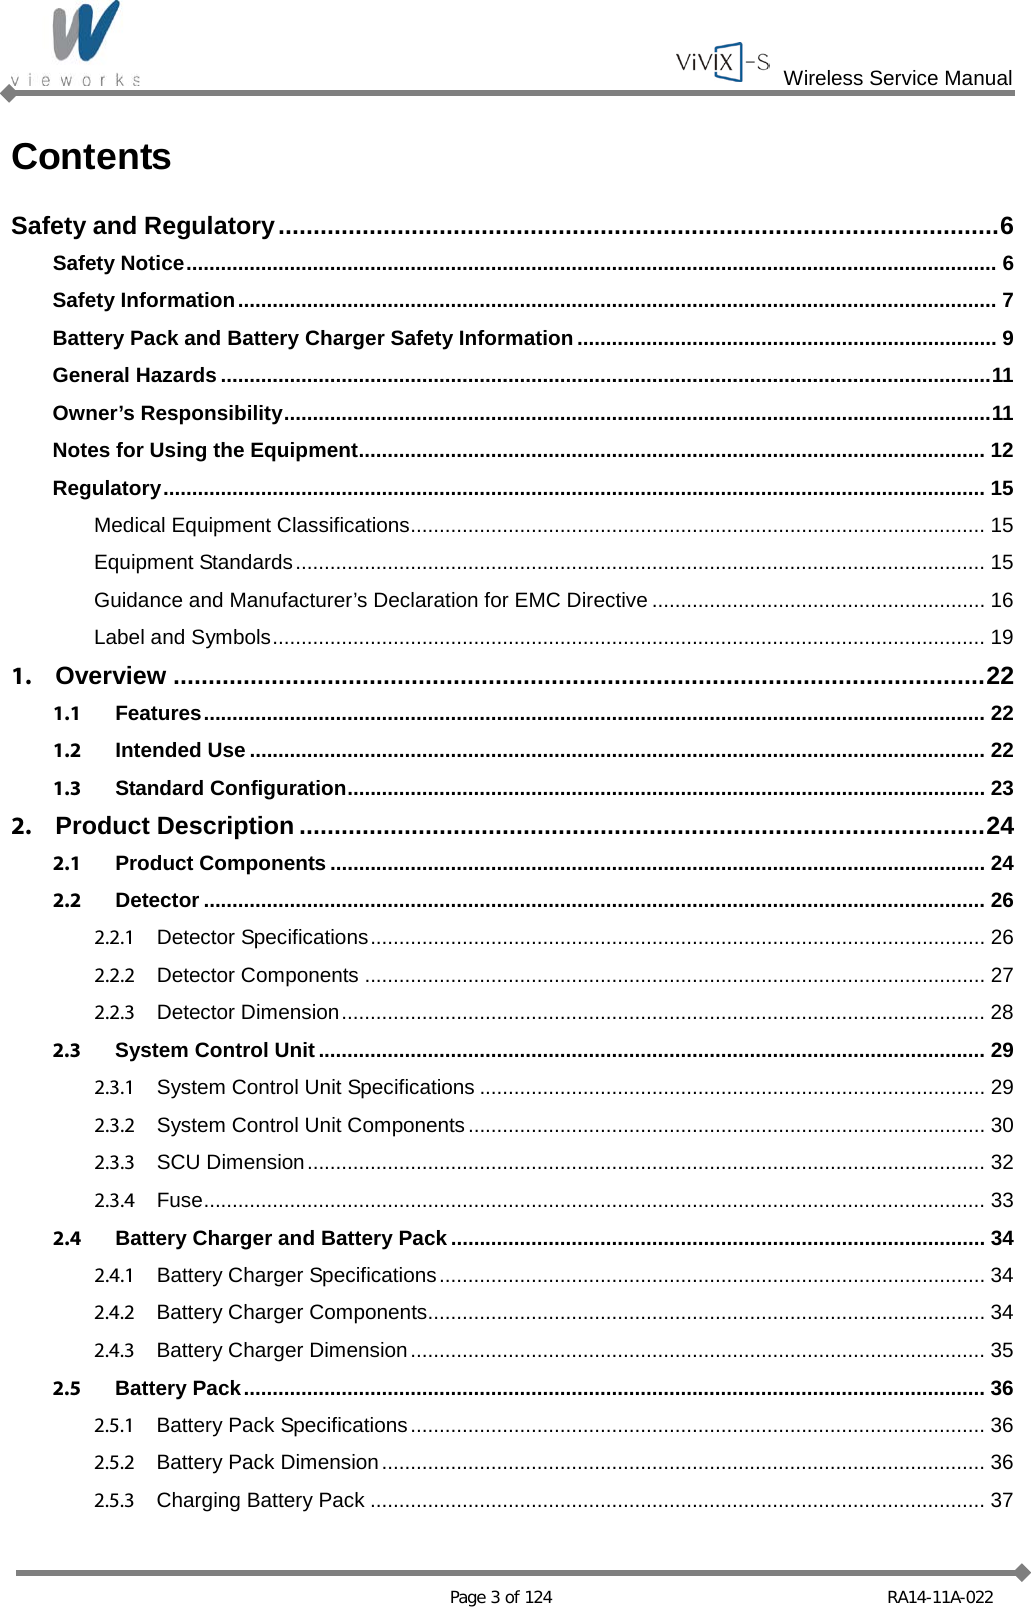  Wireless Service Manual   Page 3 of 124 RA14-11A-022 Contents Safety and Regulatory ....................................................................................................... 6 Safety Notice ............................................................................................................................................. 6 Safety Information .................................................................................................................................... 7 Battery Pack and Battery Charger Safety Information ......................................................................... 9 General Hazards ...................................................................................................................................... 11 Owner’s Responsibility ........................................................................................................................... 11 Notes for Using the Equipment ............................................................................................................. 12 Regulatory ............................................................................................................................................... 15 Medical Equipment Classifications .................................................................................................... 15 Equipment Standards ........................................................................................................................ 15 Guidance and Manufacturer’s Declaration for EMC Directive .......................................................... 16 Label and Symbols ............................................................................................................................ 19 1. Overview .................................................................................................................... 22 1.1 Features ........................................................................................................................................ 22 1.2 Intended Use ................................................................................................................................ 22 1.3 Standard Configuration ............................................................................................................... 23 2. Product Description .................................................................................................. 24 2.1 Product Components .................................................................................................................. 24 2.2 Detector ........................................................................................................................................ 26 2.2.1 Detector Specifications ........................................................................................................... 26 2.2.2 Detector Components ............................................................................................................ 27 2.2.3 Detector Dimension ................................................................................................................ 28 2.3 System Control Unit .................................................................................................................... 29 2.3.1 System Control Unit Specifications ........................................................................................ 29 2.3.2 System Control Unit Components .......................................................................................... 30 2.3.3 SCU Dimension ...................................................................................................................... 32 2.3.4 Fuse ........................................................................................................................................ 33 2.4 Battery Charger and Battery Pack ............................................................................................. 34 2.4.1 Battery Charger Specifications ............................................................................................... 34 2.4.2 Battery Charger Components ................................................................................................. 34 2.4.3 Battery Charger Dimension .................................................................................................... 35 2.5 Battery Pack ................................................................................................................................. 36 2.5.1 Battery Pack Specifications .................................................................................................... 36 2.5.2 Battery Pack Dimension ......................................................................................................... 36 2.5.3 Charging Battery Pack ........................................................................................................... 37 